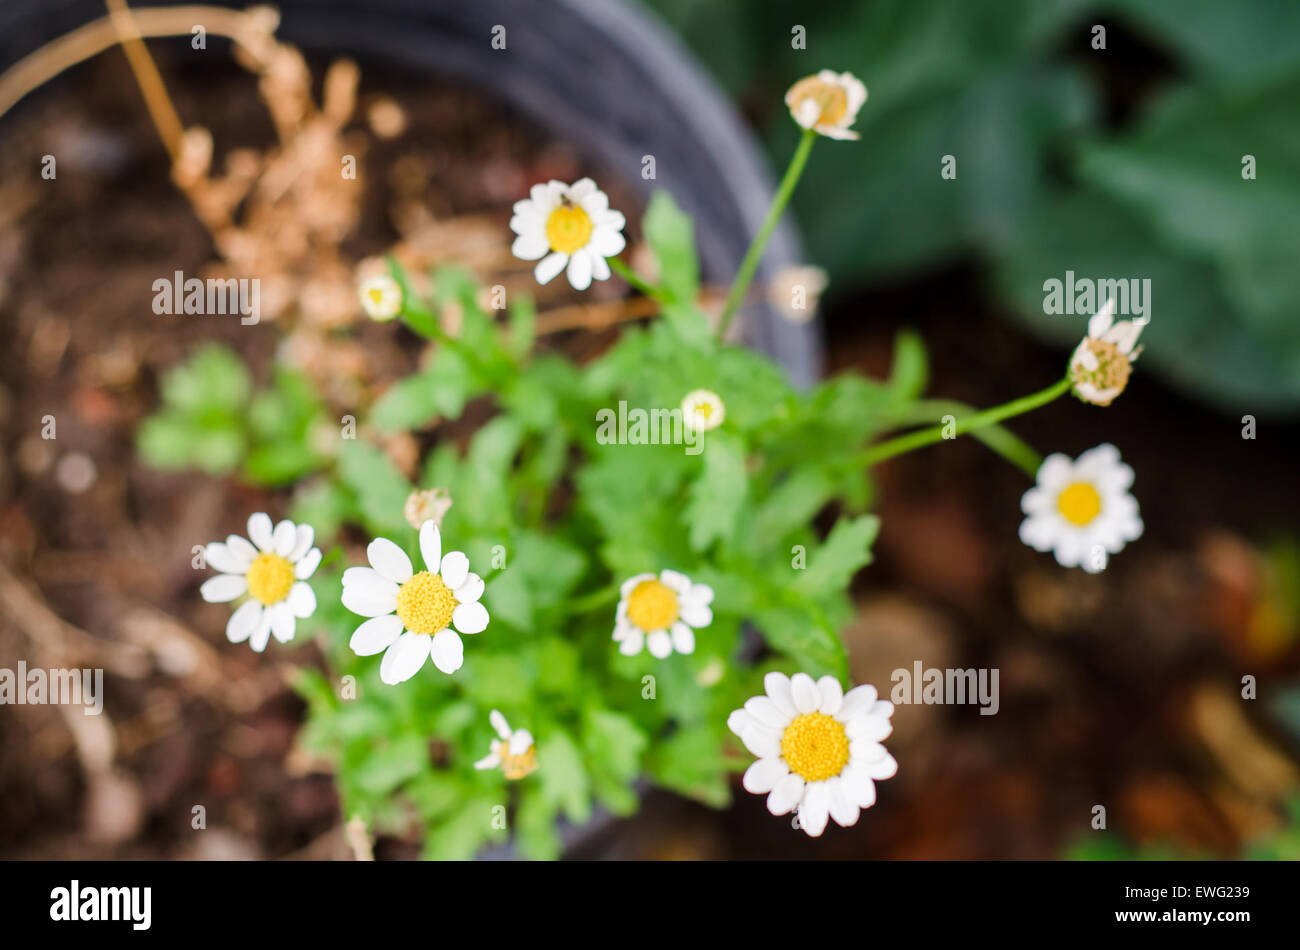 White Flowers on Daisy Plant Asteraceae Compositae Daisy Flowers Petals Sunflower aster plant white flowers Stock Photo